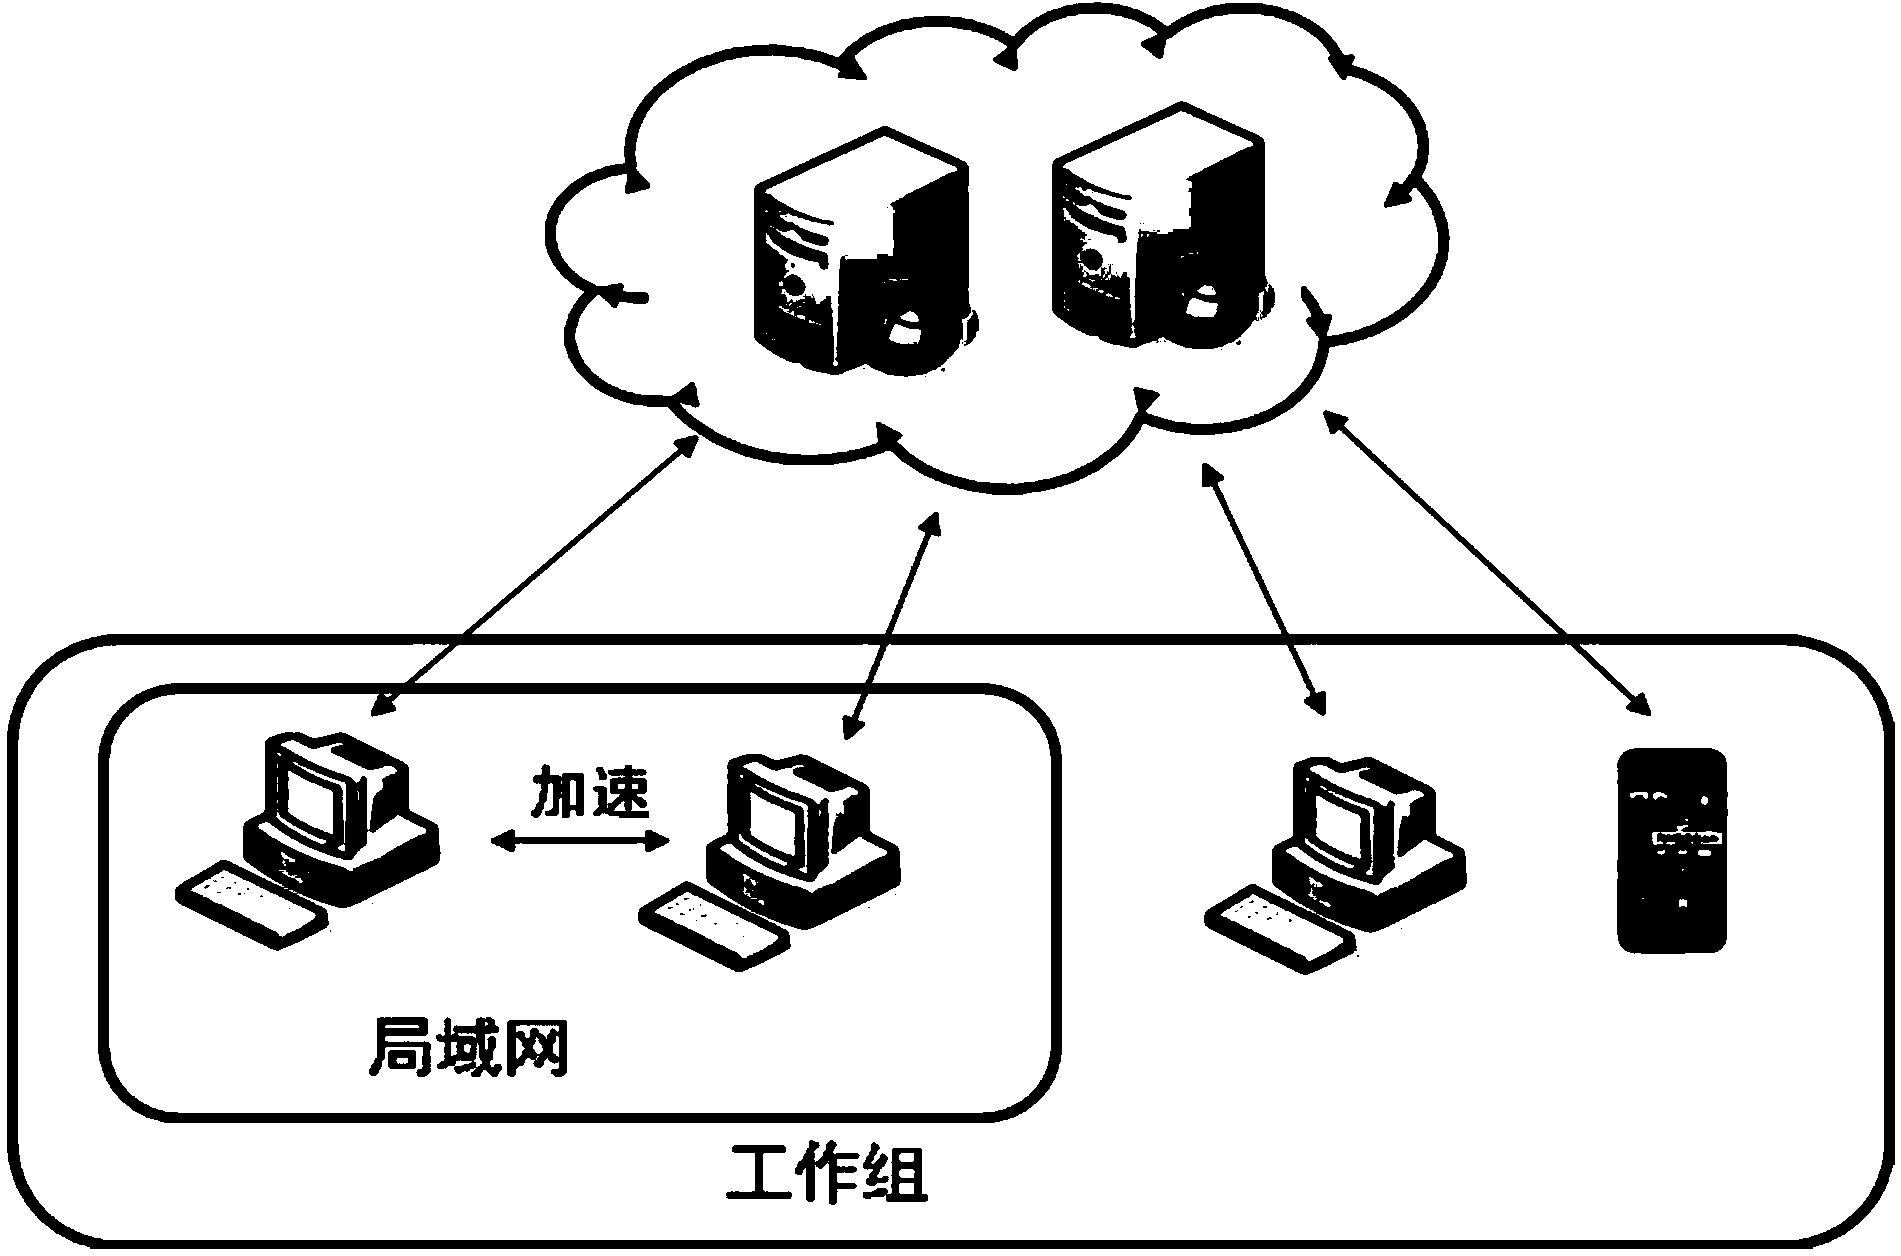 Cloud synchronous local area network accelerating system based on working group document